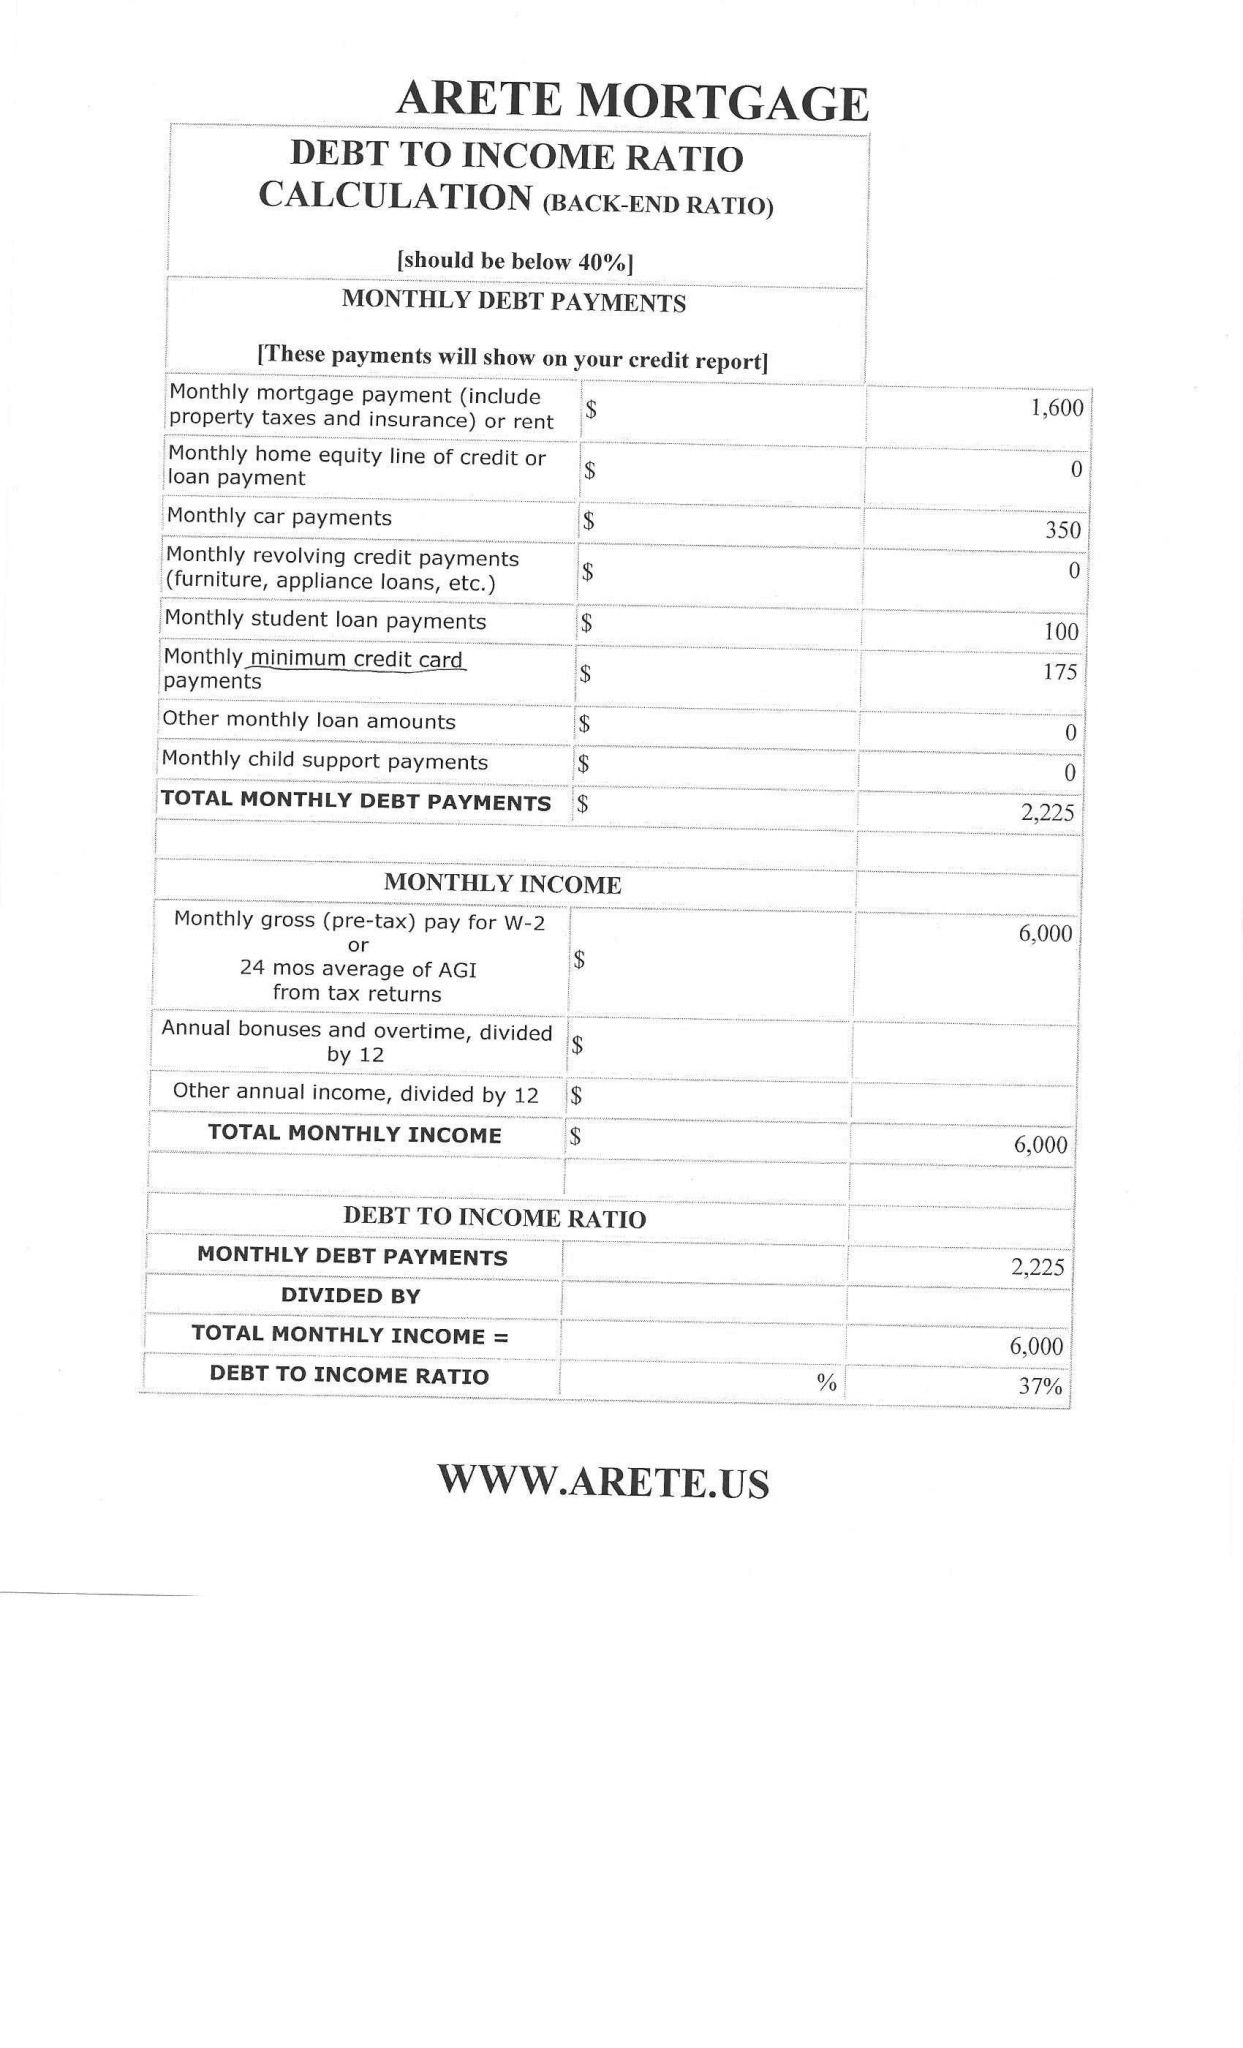 Income Calculation Worksheet for Mortgage with Free forms 2019 Mortgage Debt to In E Calculator